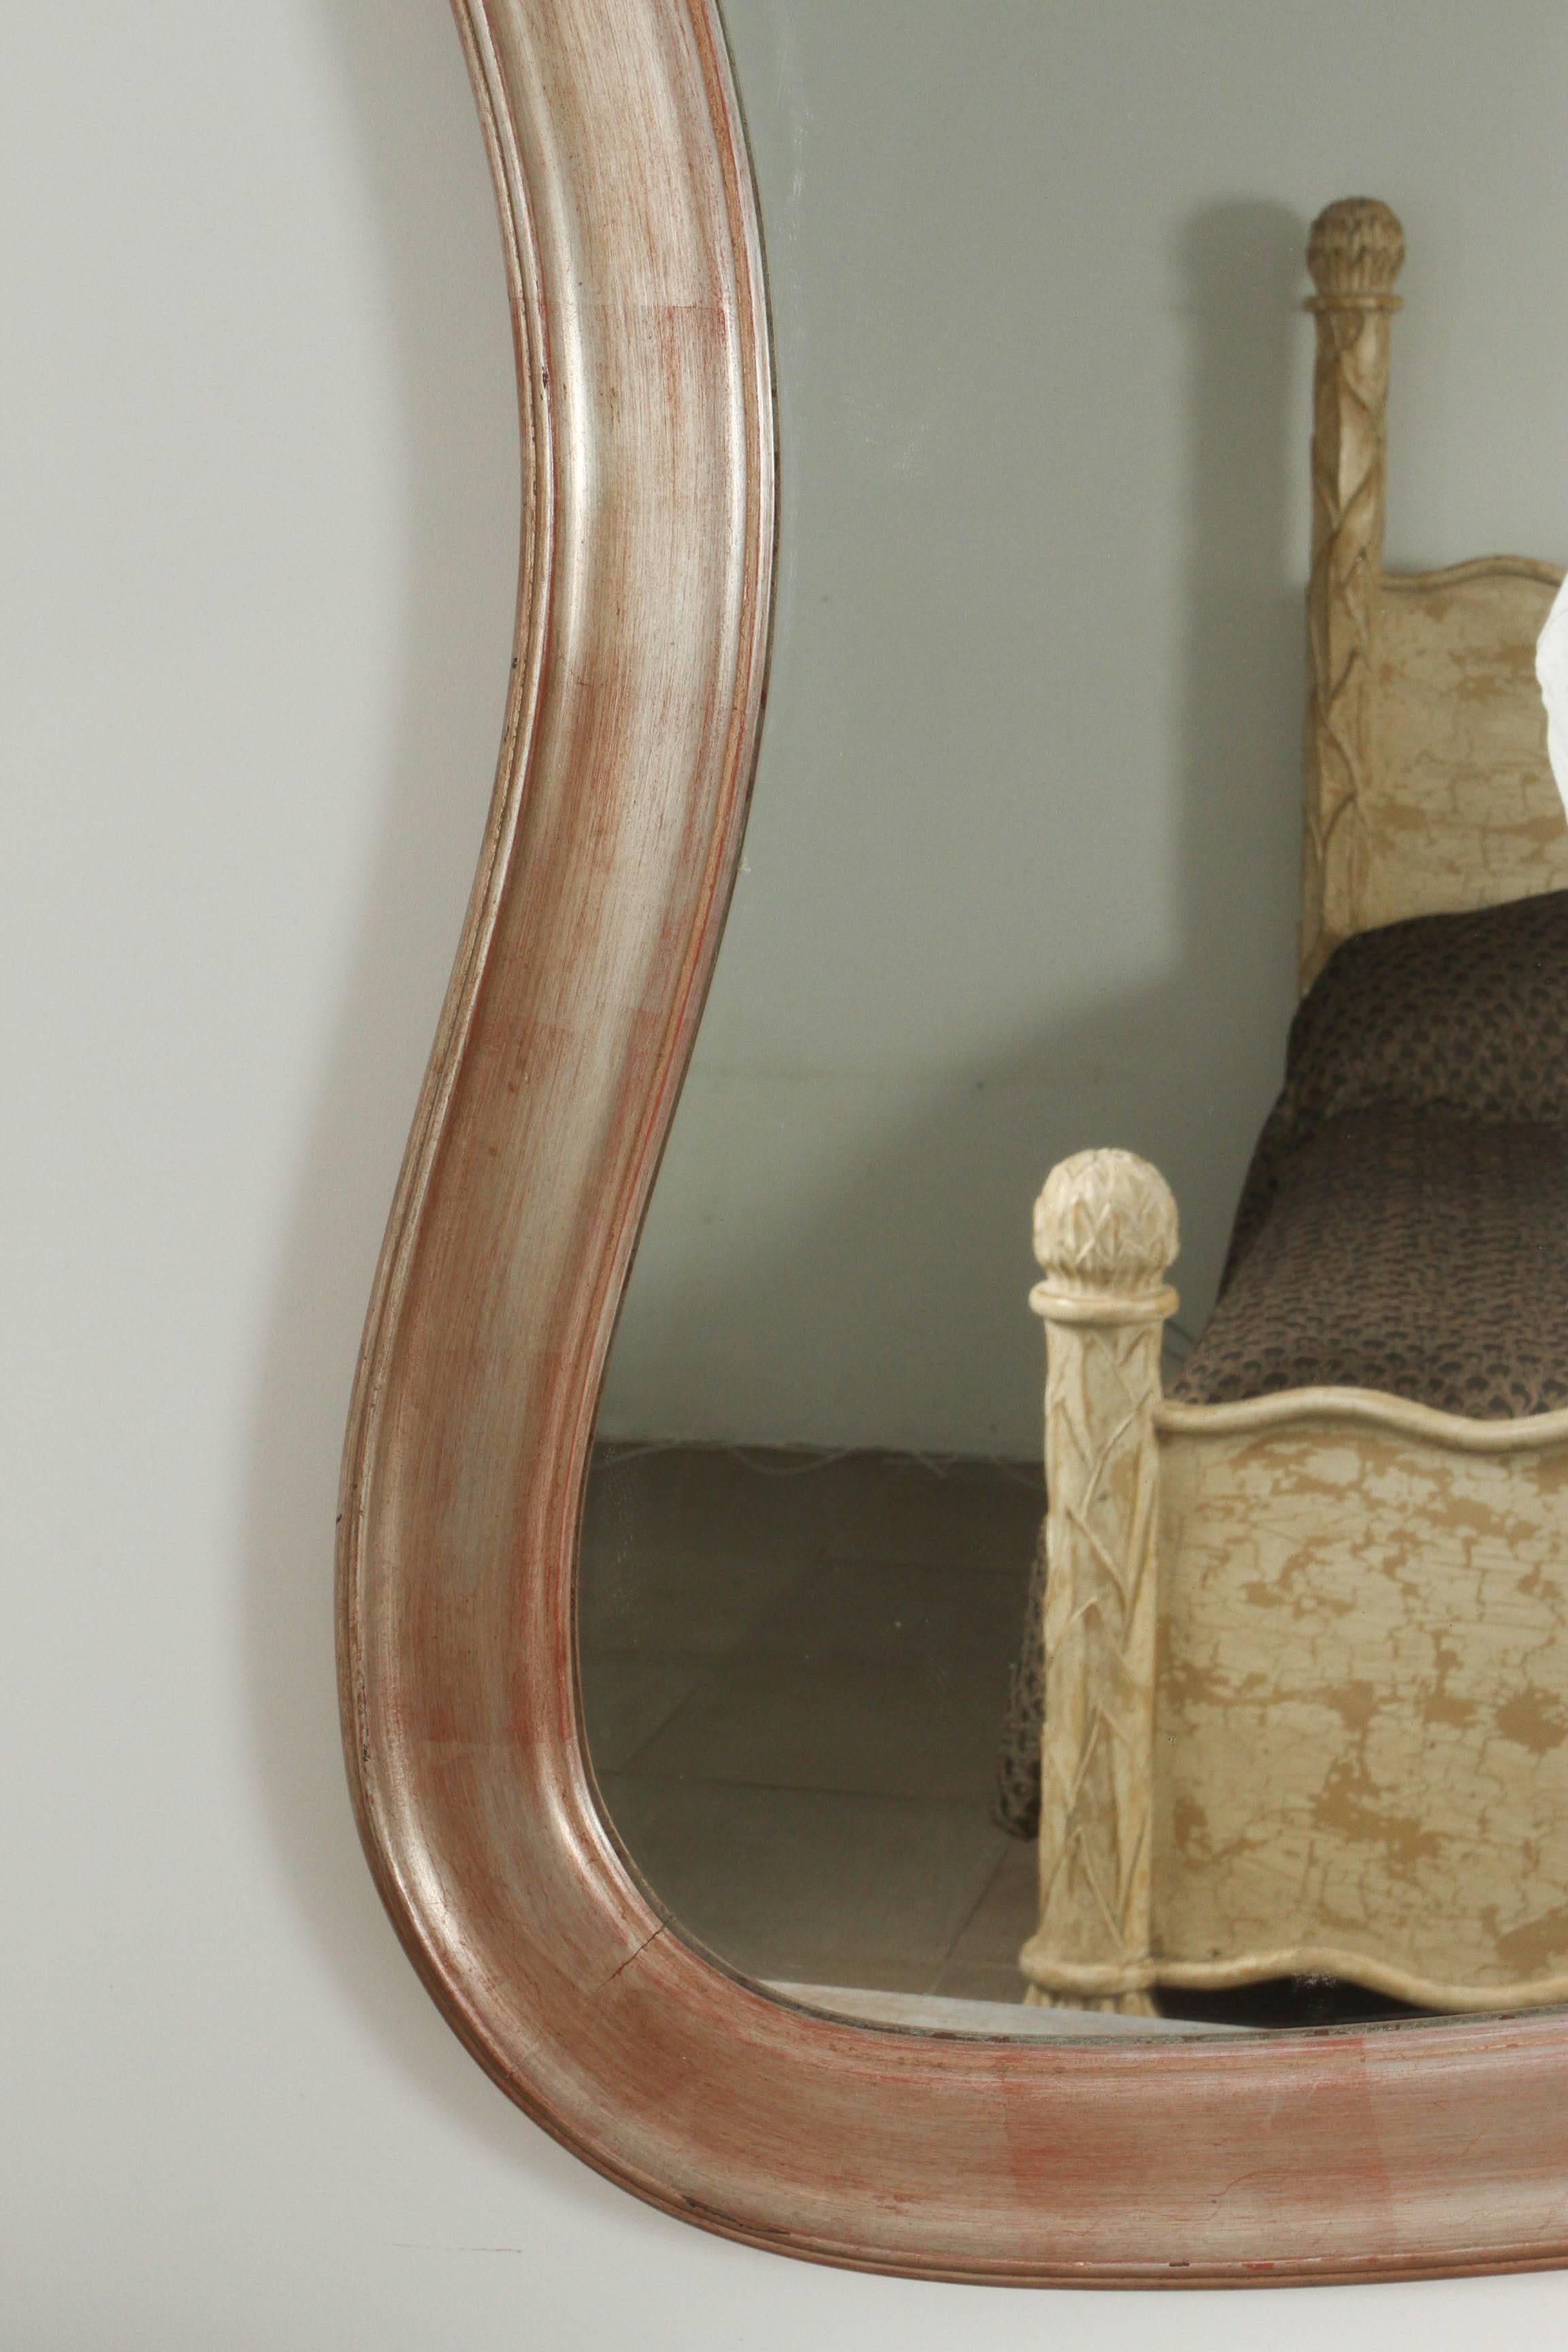 Exquisite rare Rococo modern mirror by James Mont.
This unusual mirror has an undulating frame retaining its original finish of silver leaf.
Wonderful patina with appropriate wear consistent with age.

  